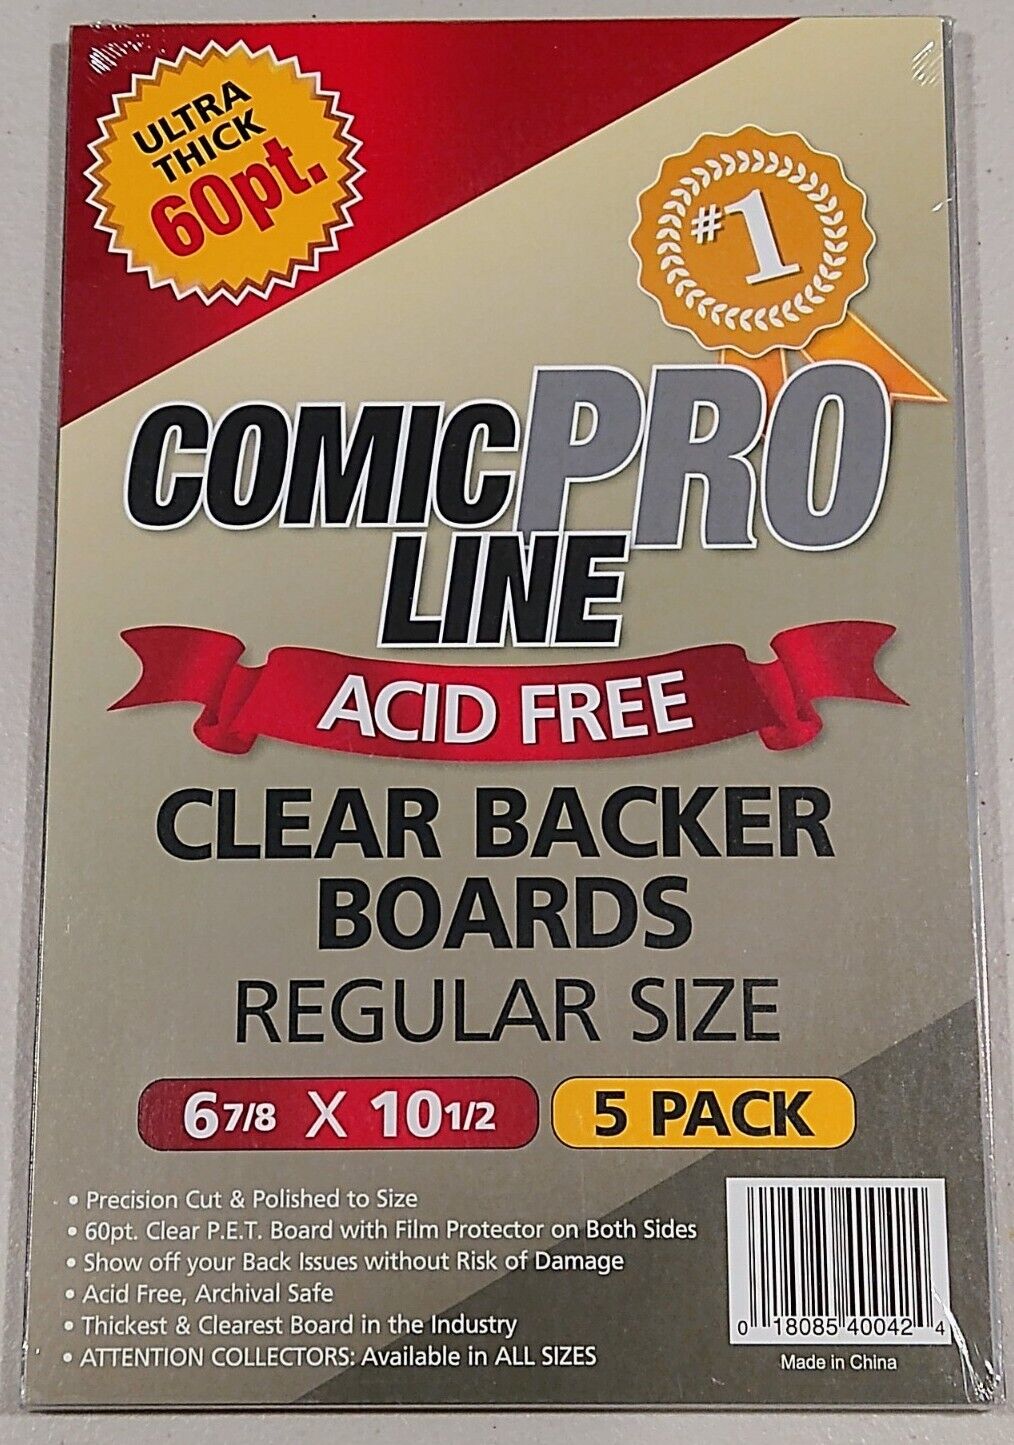 5-Pack Comic Pro Line Thick 60pt Crystal Clear Acid Free Backing Boards Regular